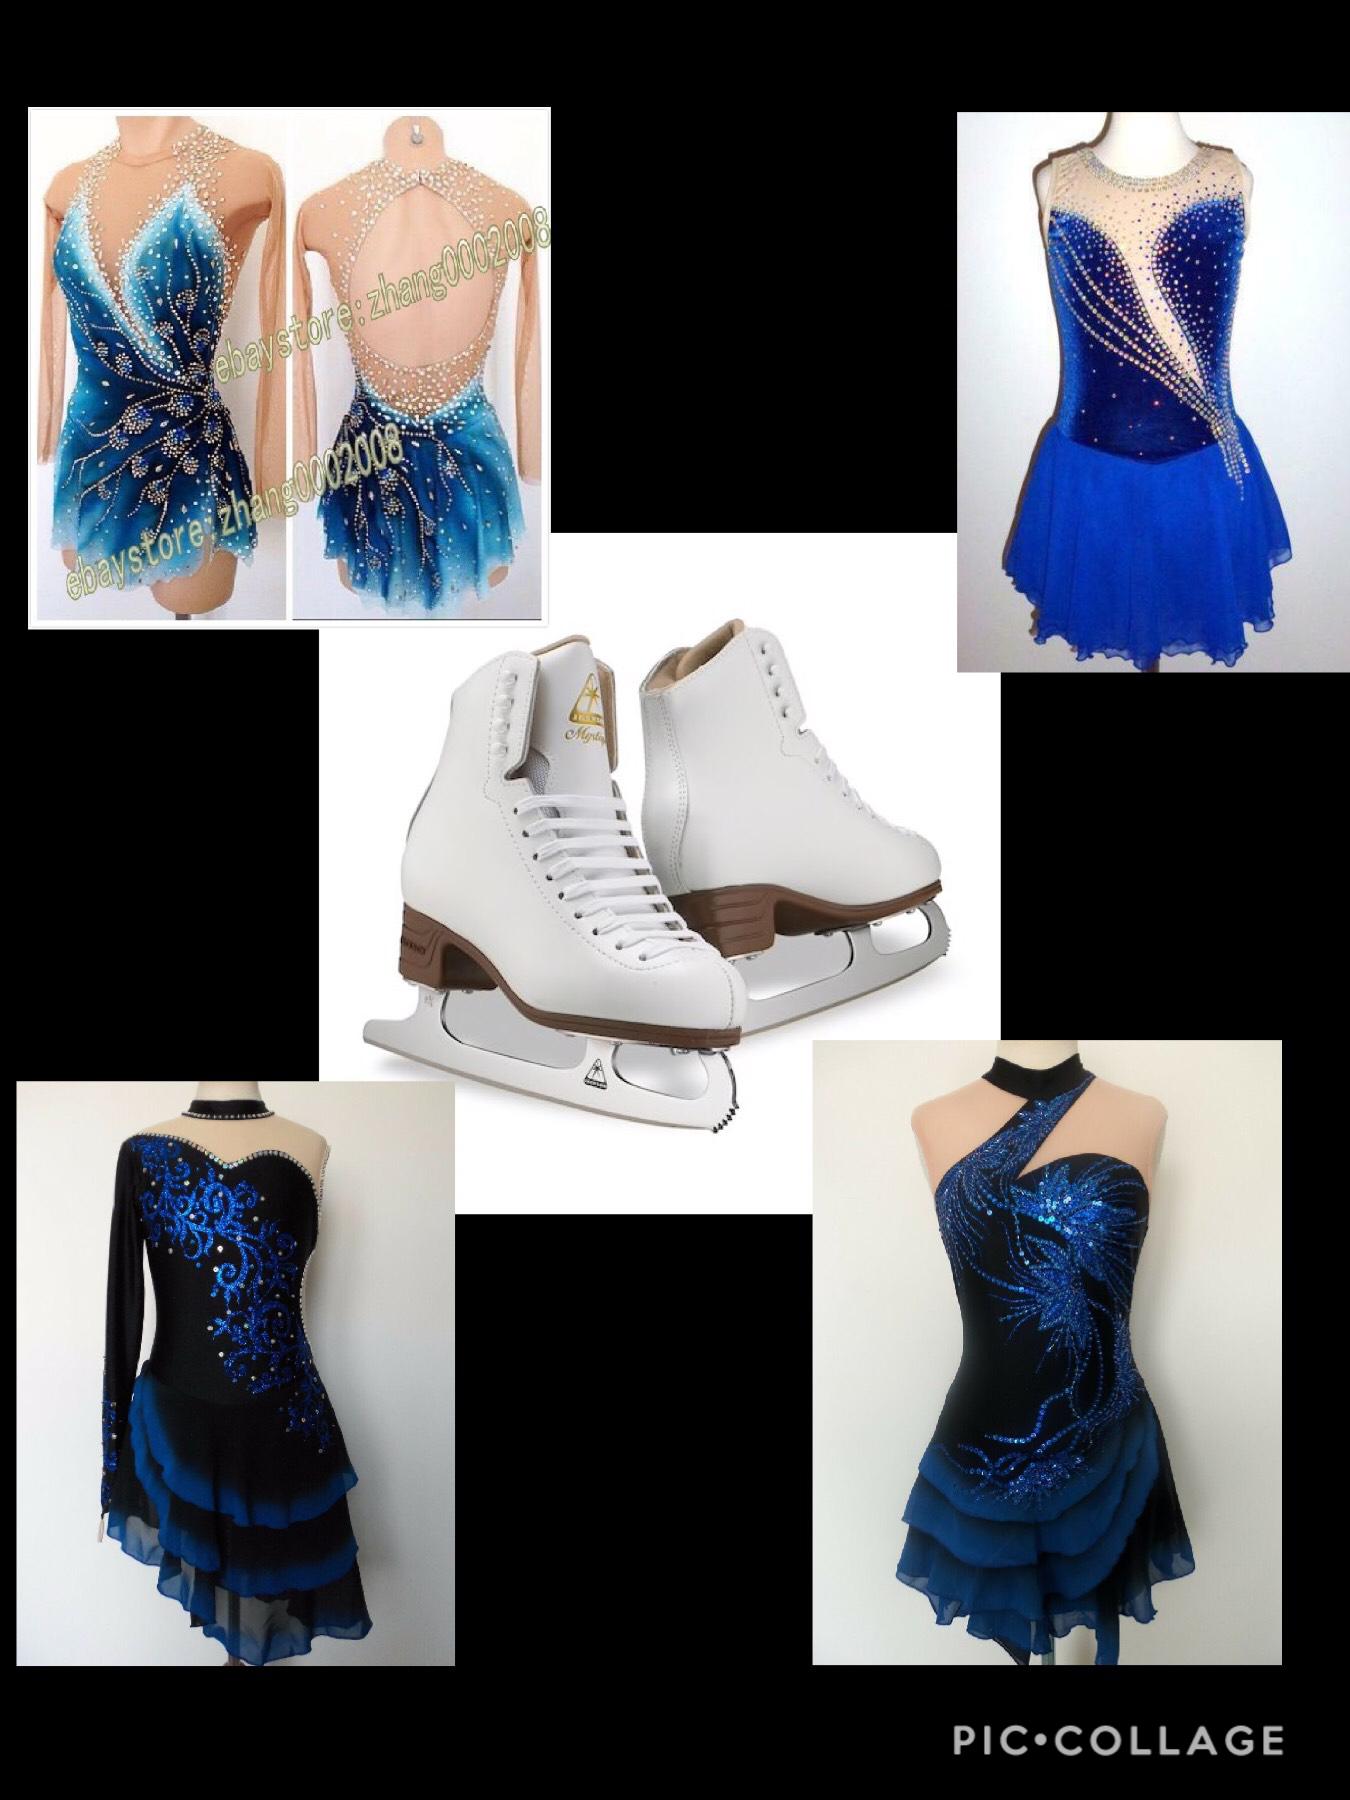                    Tap⛸
What dress is your favorite
Sorry that I haven’t been posting lately, I have been really busy